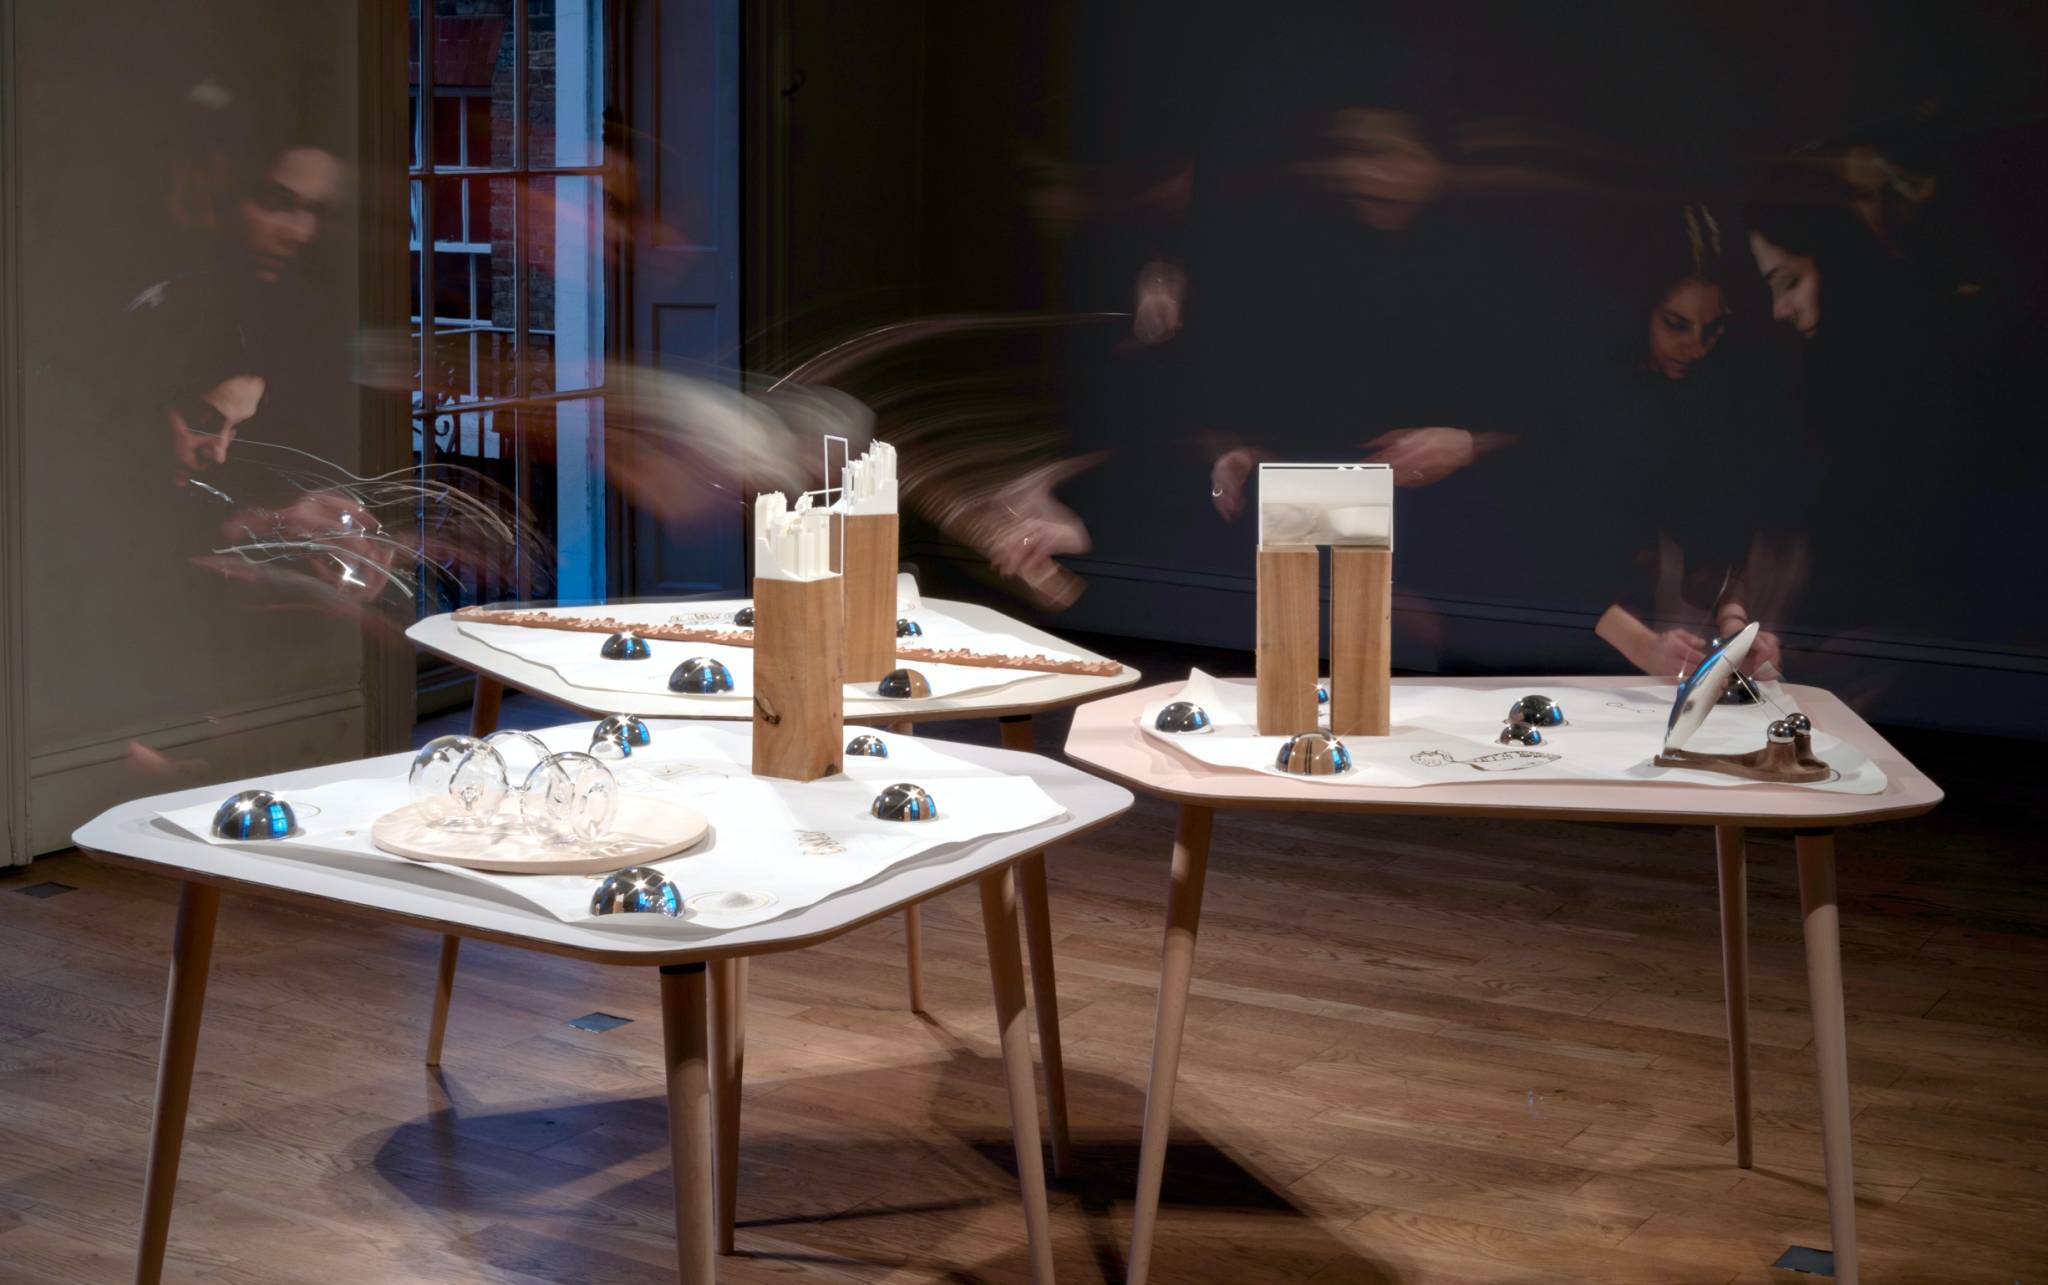 Three tables facing each other, with various pieces of white paper, glass, metal and wood figures. Long exposure shows a women's figure placing the items on the table.